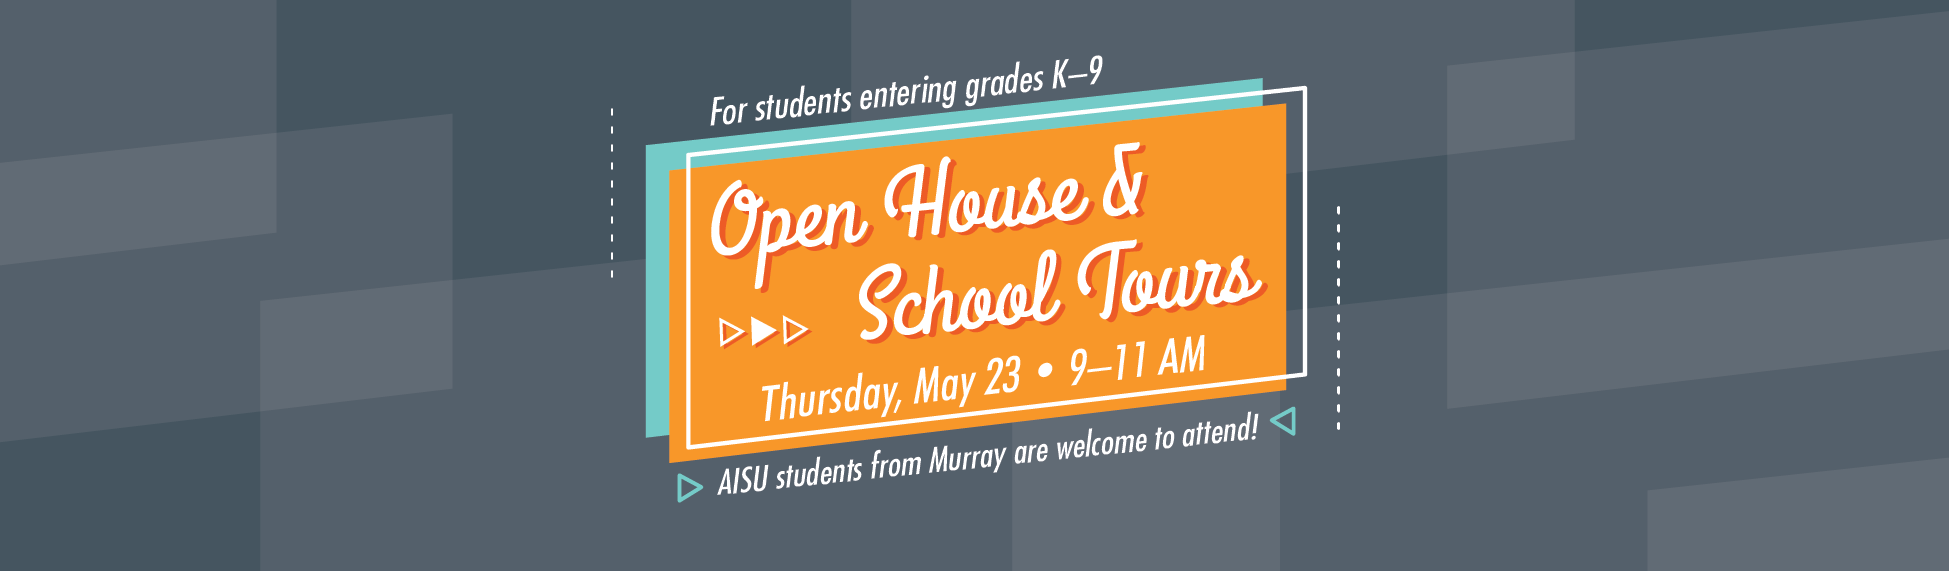 Open House & School Tours - May 23rd